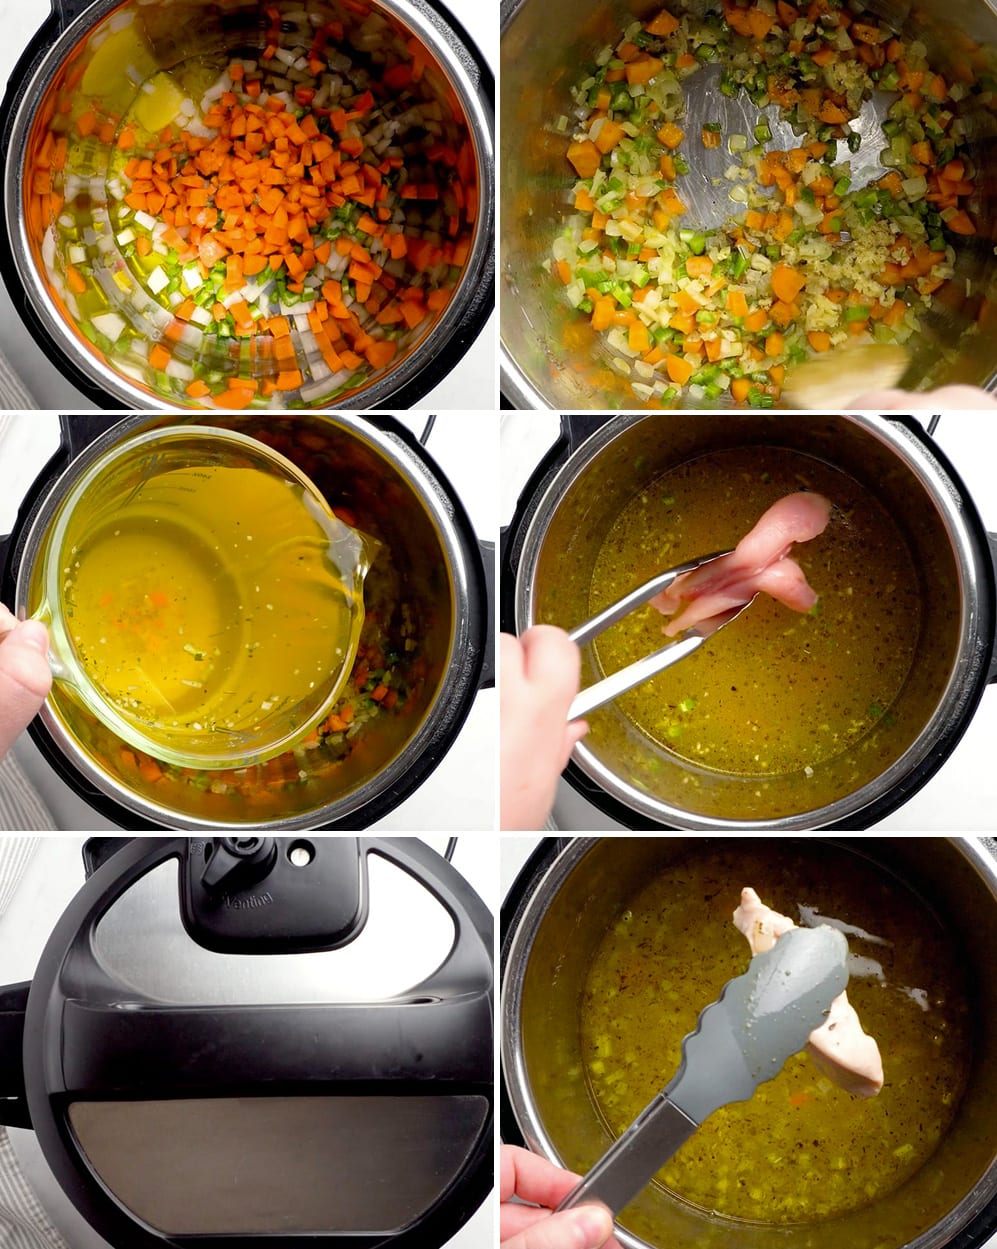 step by step showing how to make chicken orzo soup in the instant pot - sauteeing onions and vegetables, adding stock and chicken, pressure cooking.